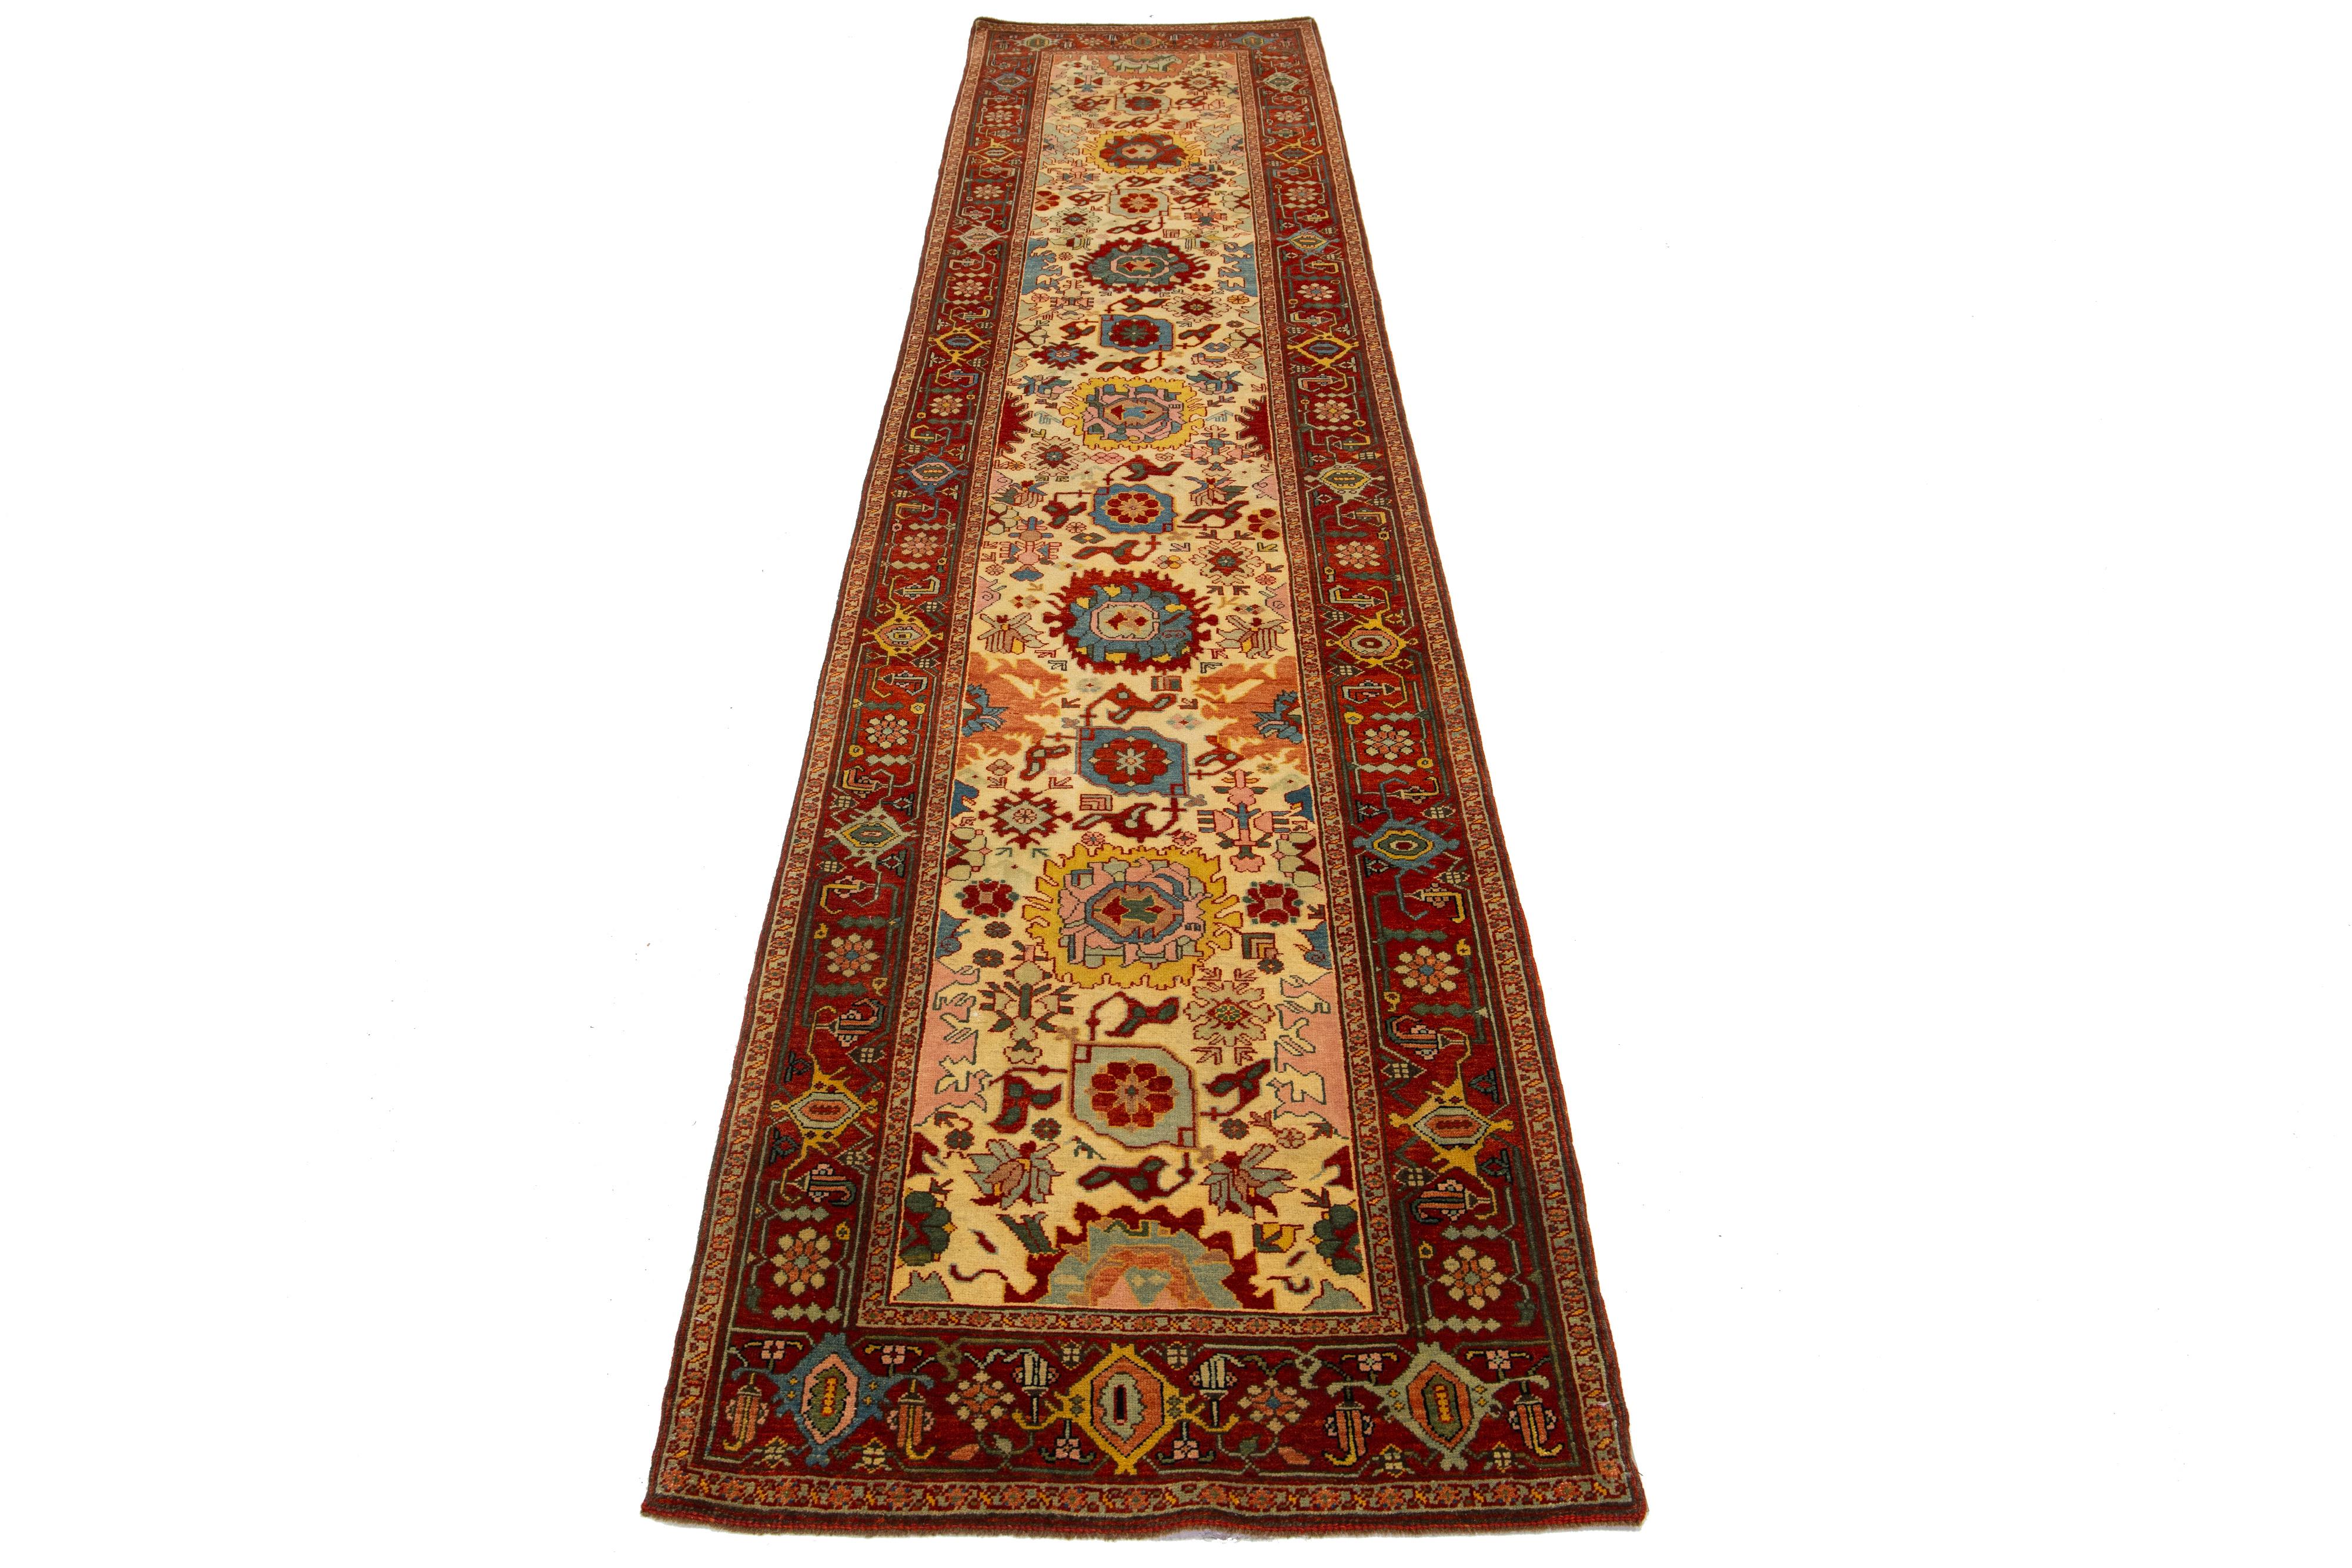 This beautiful modern Oushak hand-knotted wool rug features a beige color field. It is a Turkish piece with a red frame and stunning accent colors of blue, yellow, green, and pink, all woven into a gorgeous all-over floral design.

This rug measures